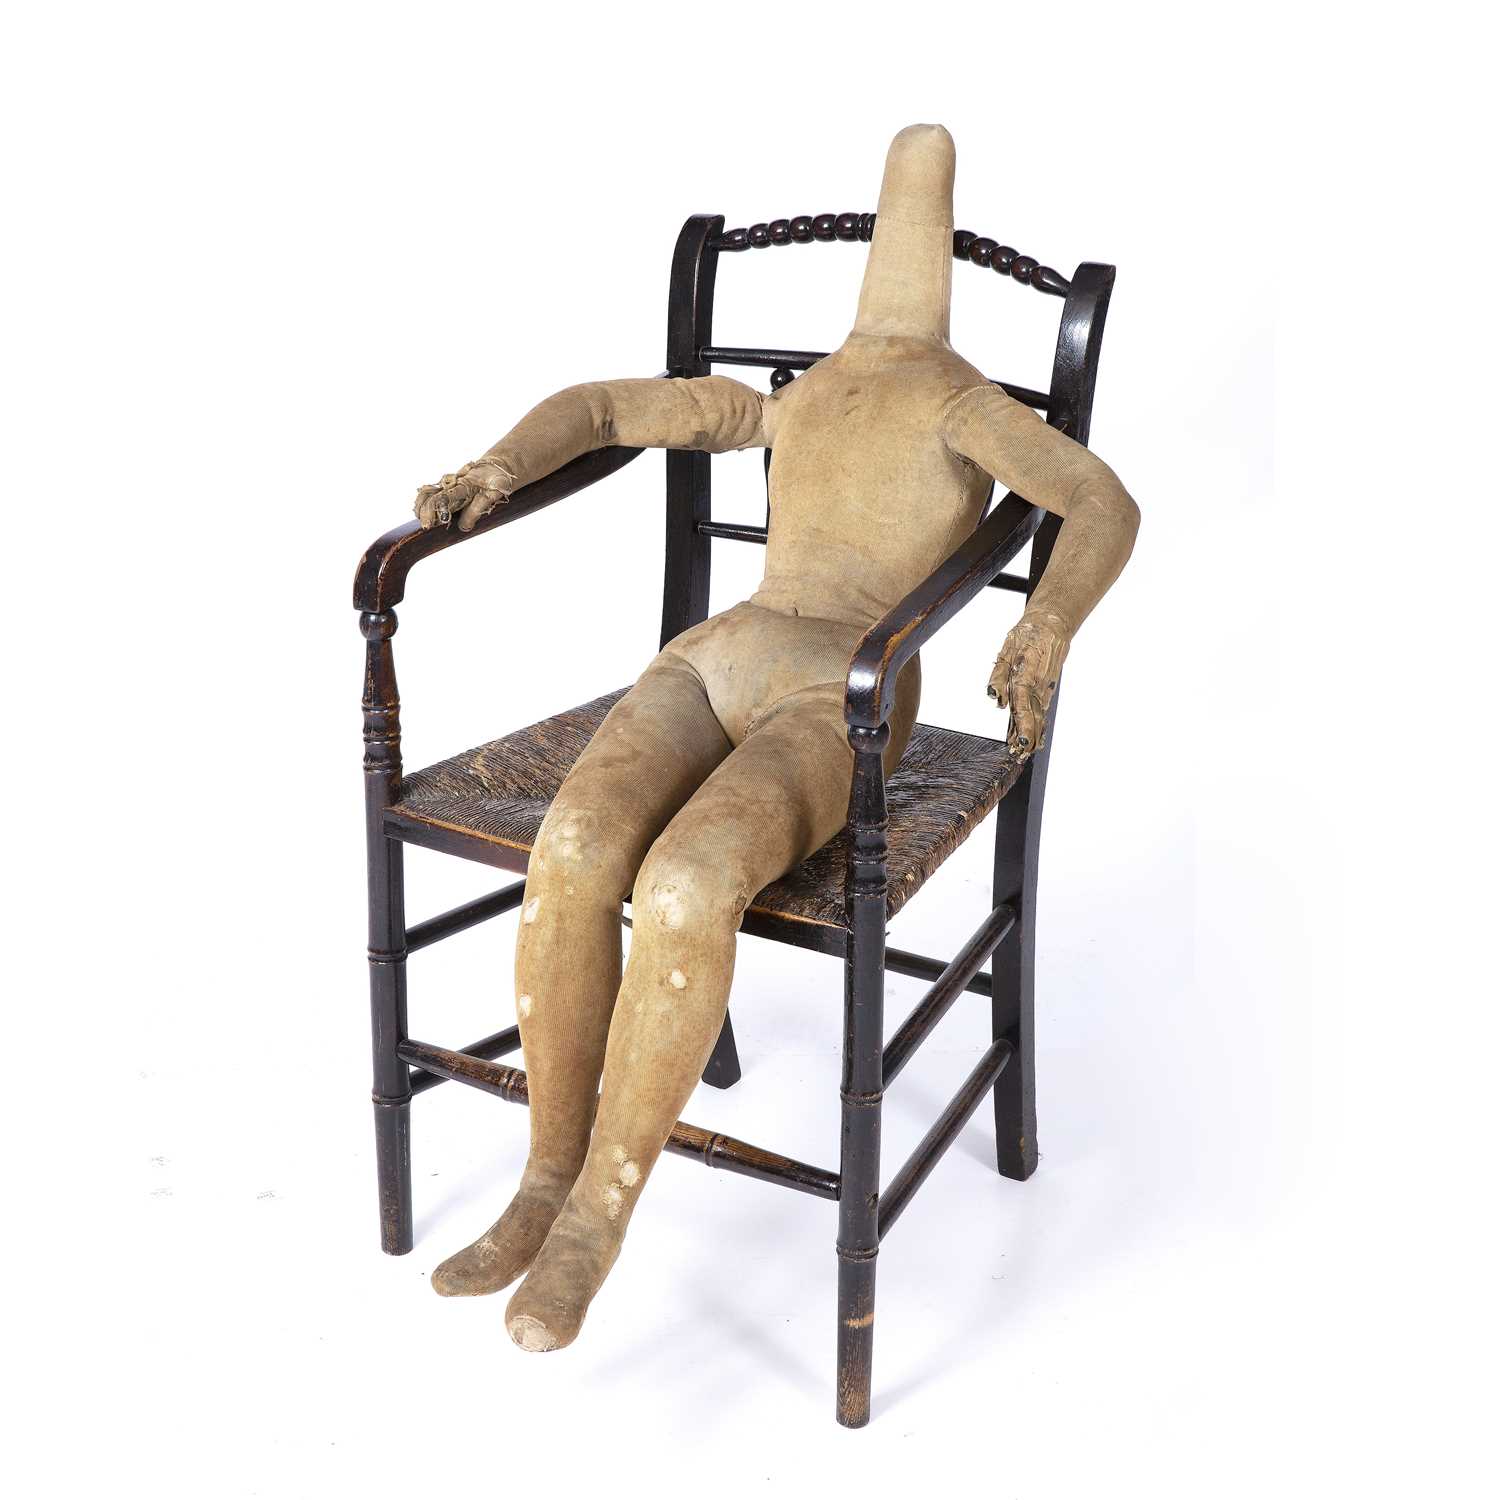 A mid 19th century child size artists lay figure with articulated brass joints and a wooden frame - Bild 2 aus 5